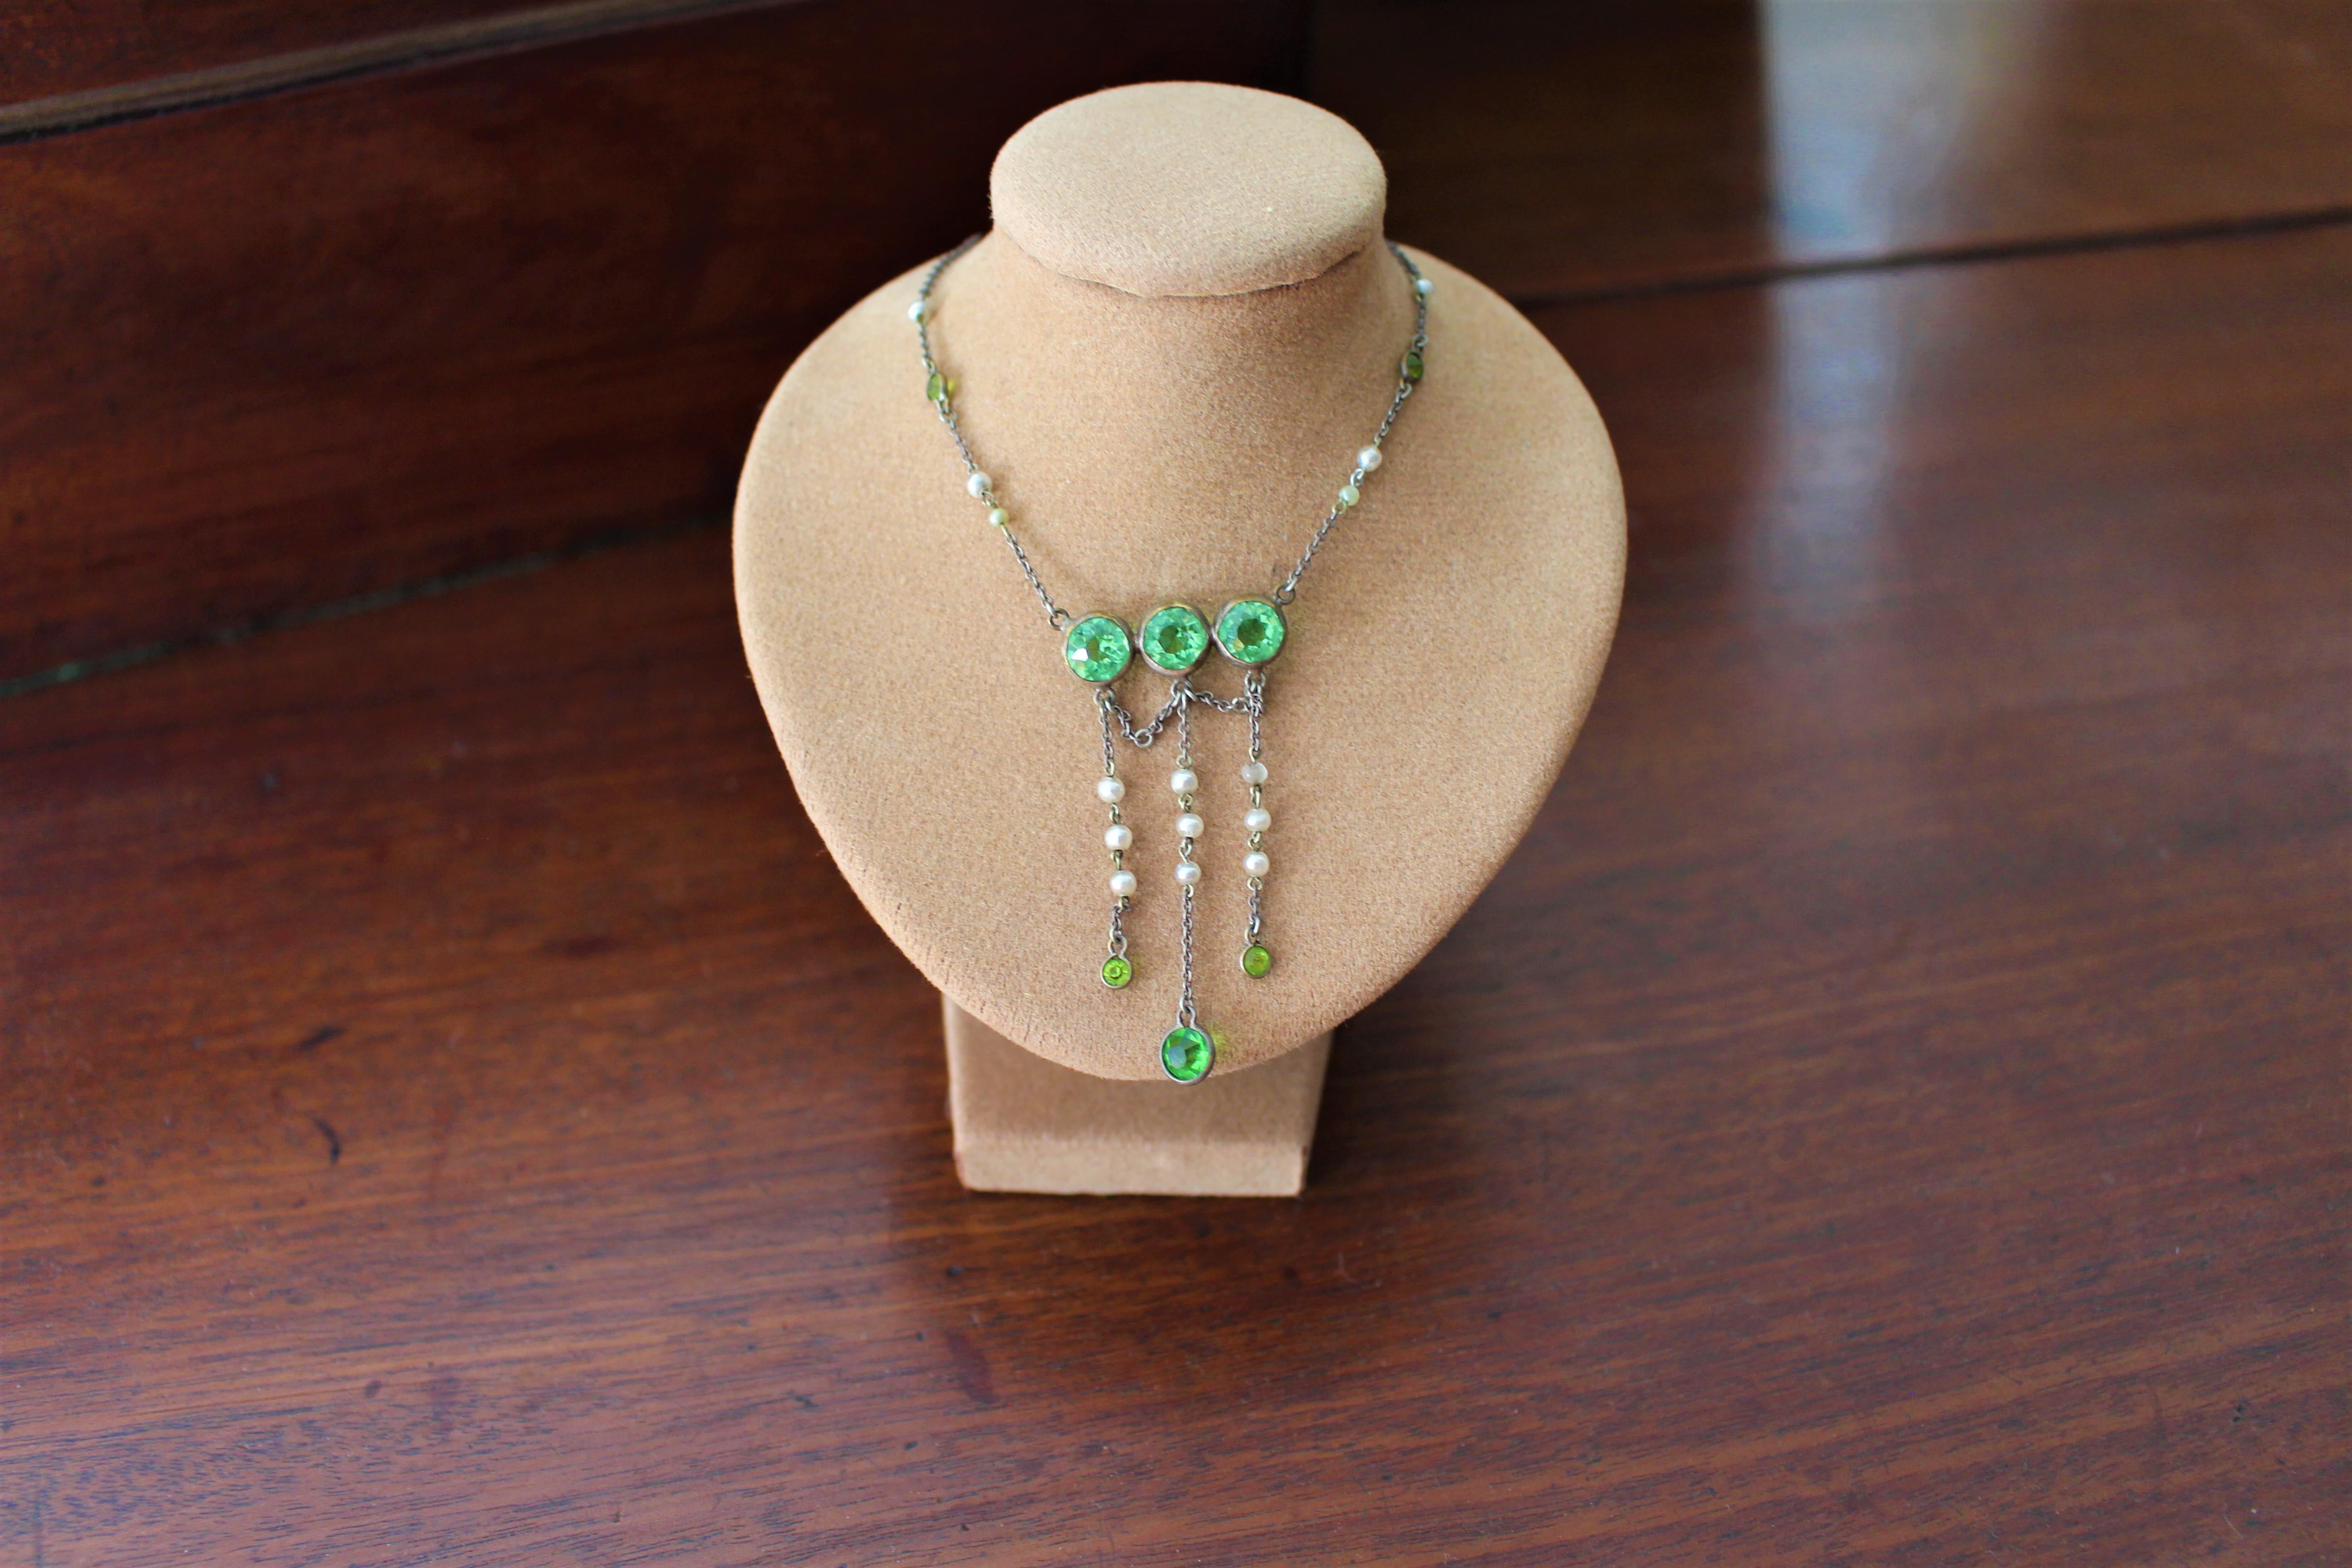 1930s Art Deco Peridot Pearl Gem Stone Pendant Lavaliere Necklace Sautoir Chain In Good Condition For Sale In Dorking, Surrey